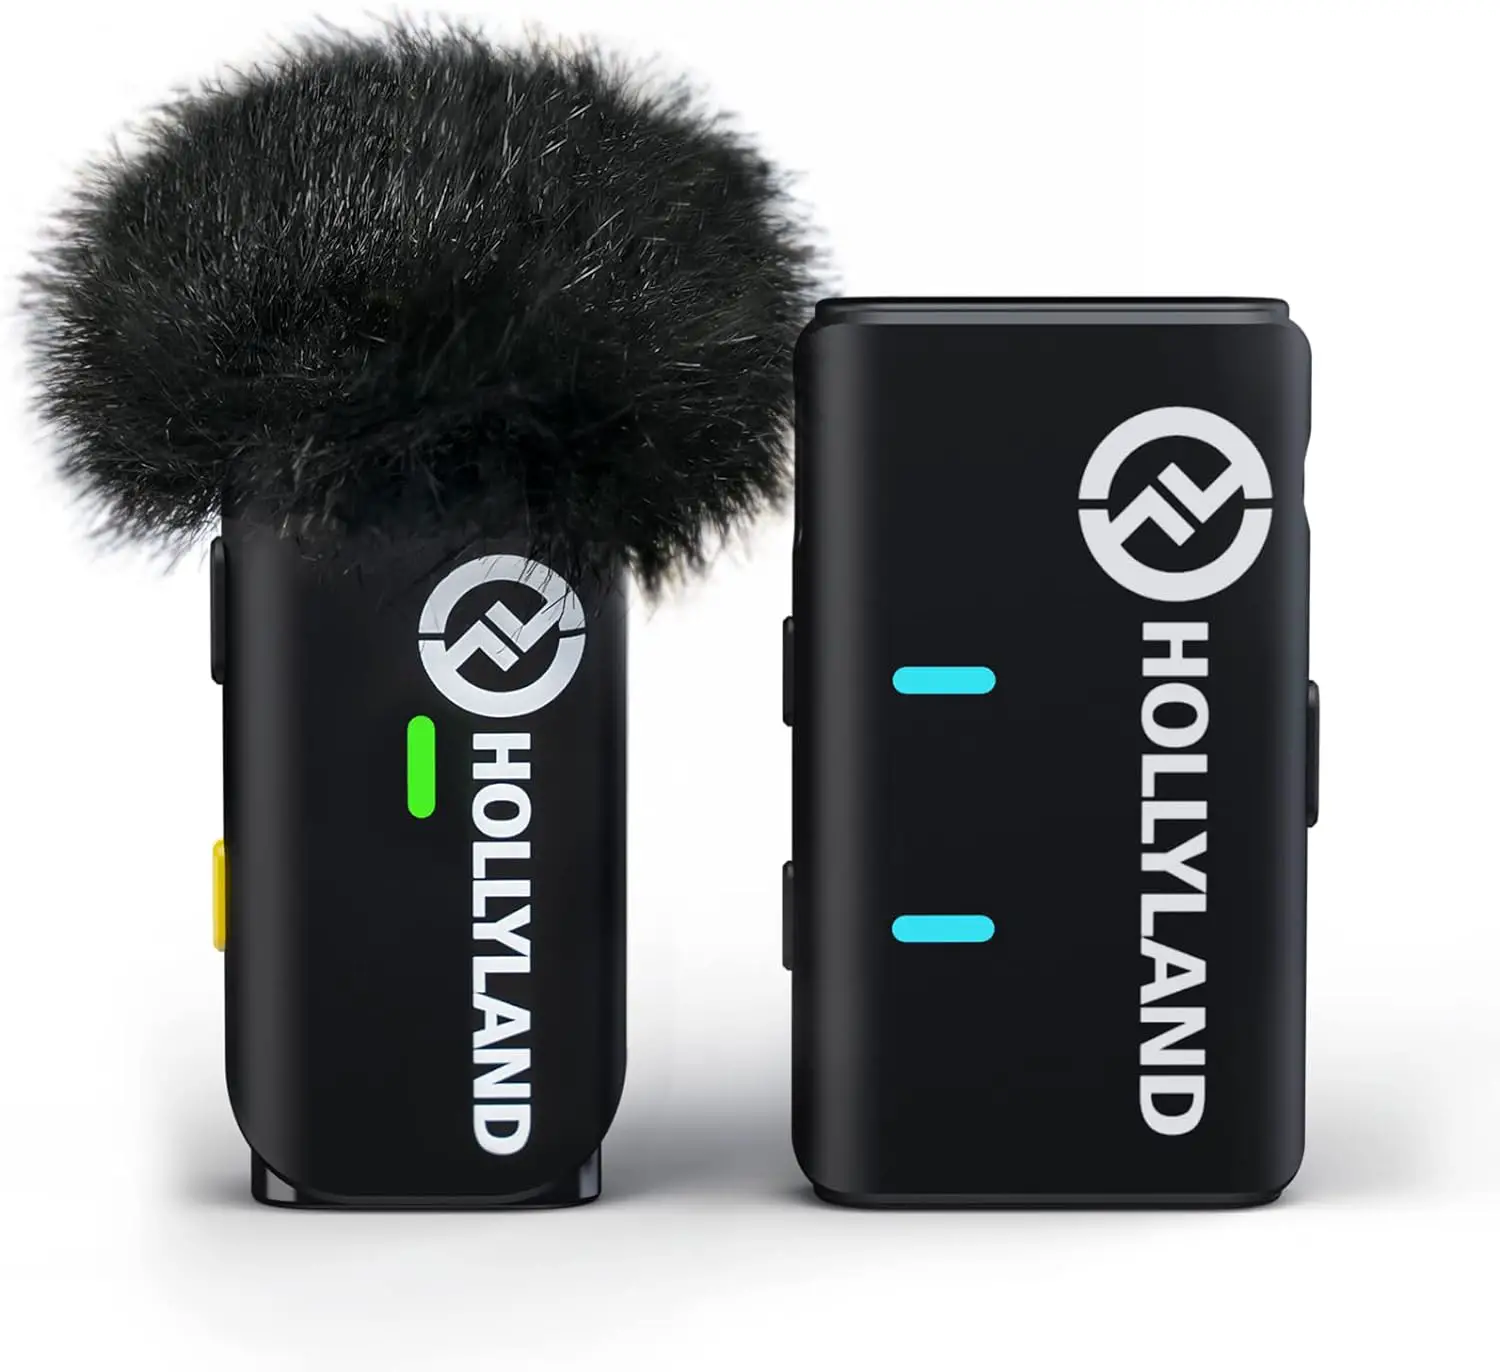 Hollyland Lark M1 Wireless Lavalier Microphone 1TX+1RX No Charging Case Compatible with iPhone Android Camera